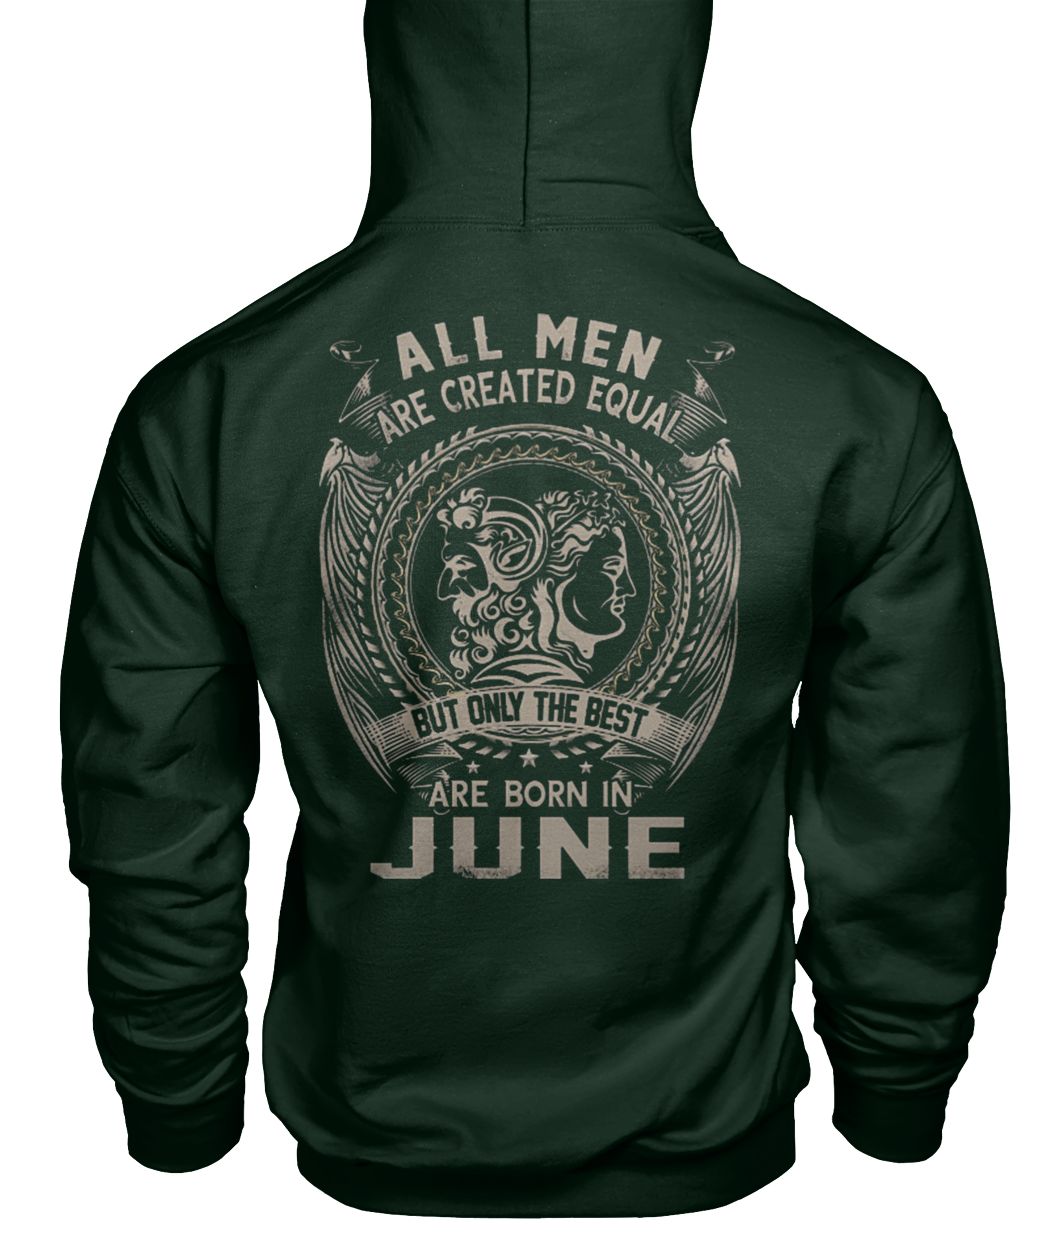 All men are created equal but only the best are born in june gildan hoodie